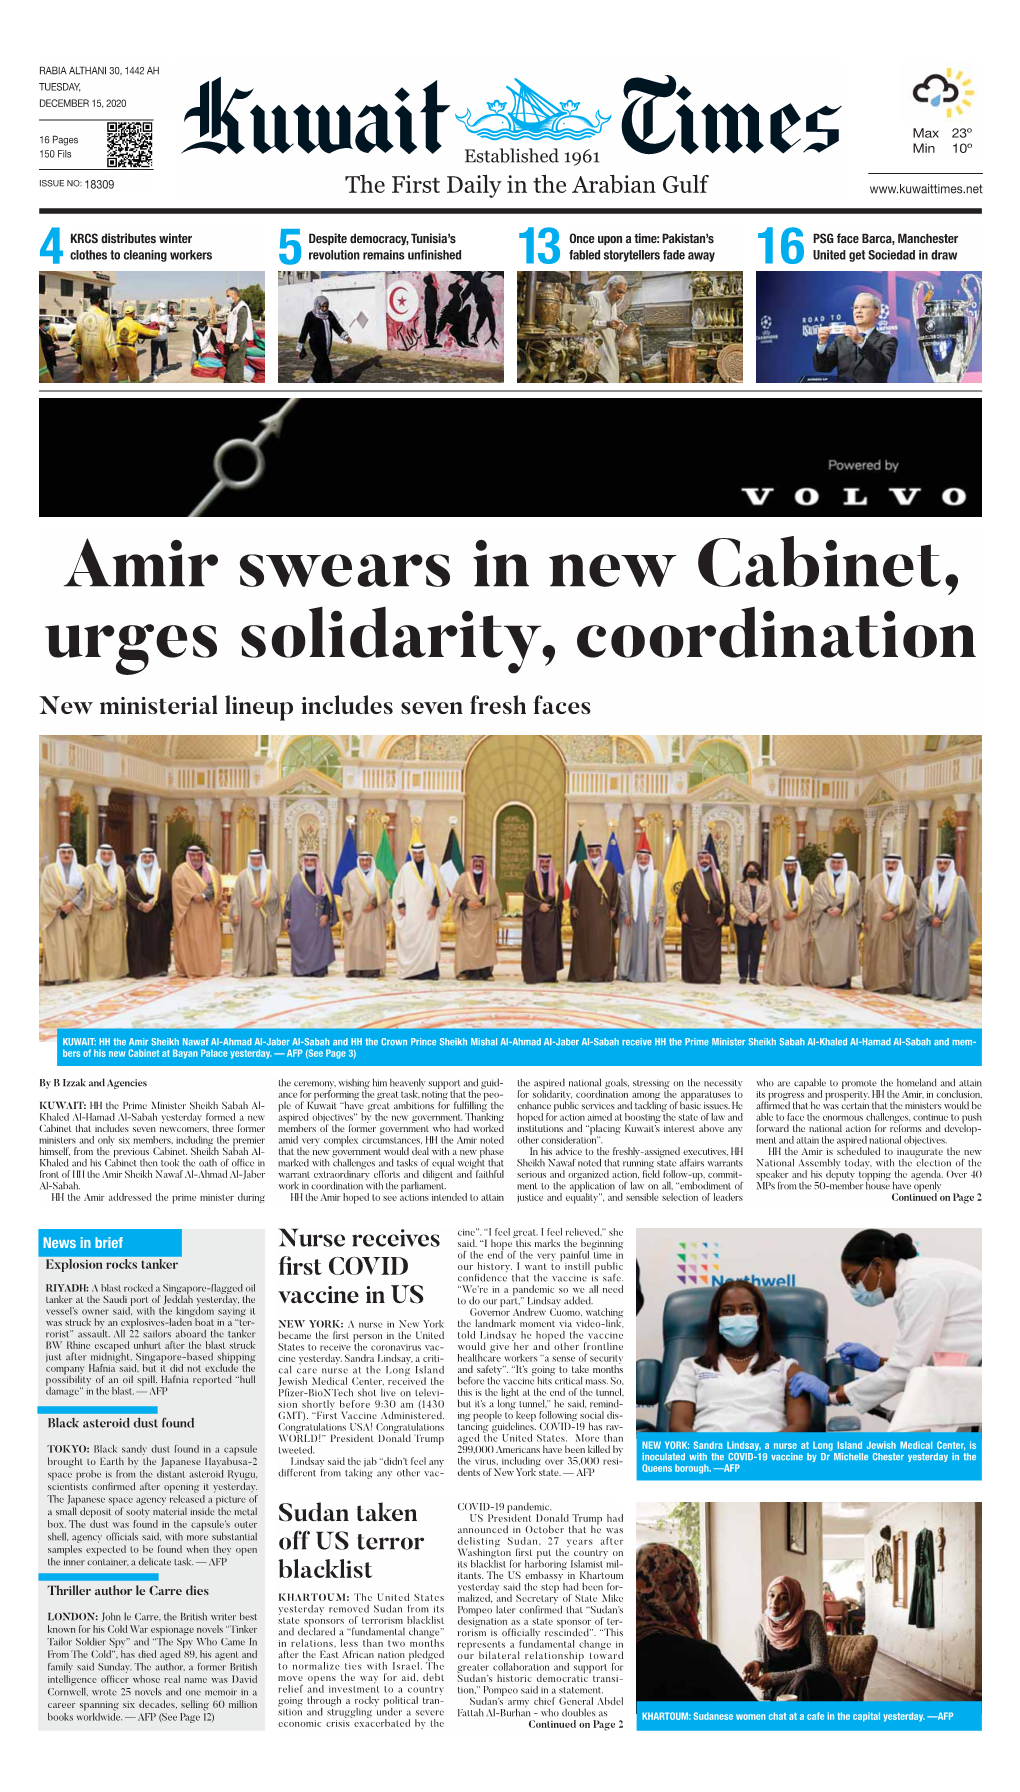 Amir Swears in New Cabinet, Urges Solidarity, Coordination New Ministerial Lineup Includes Seven Fresh Faces